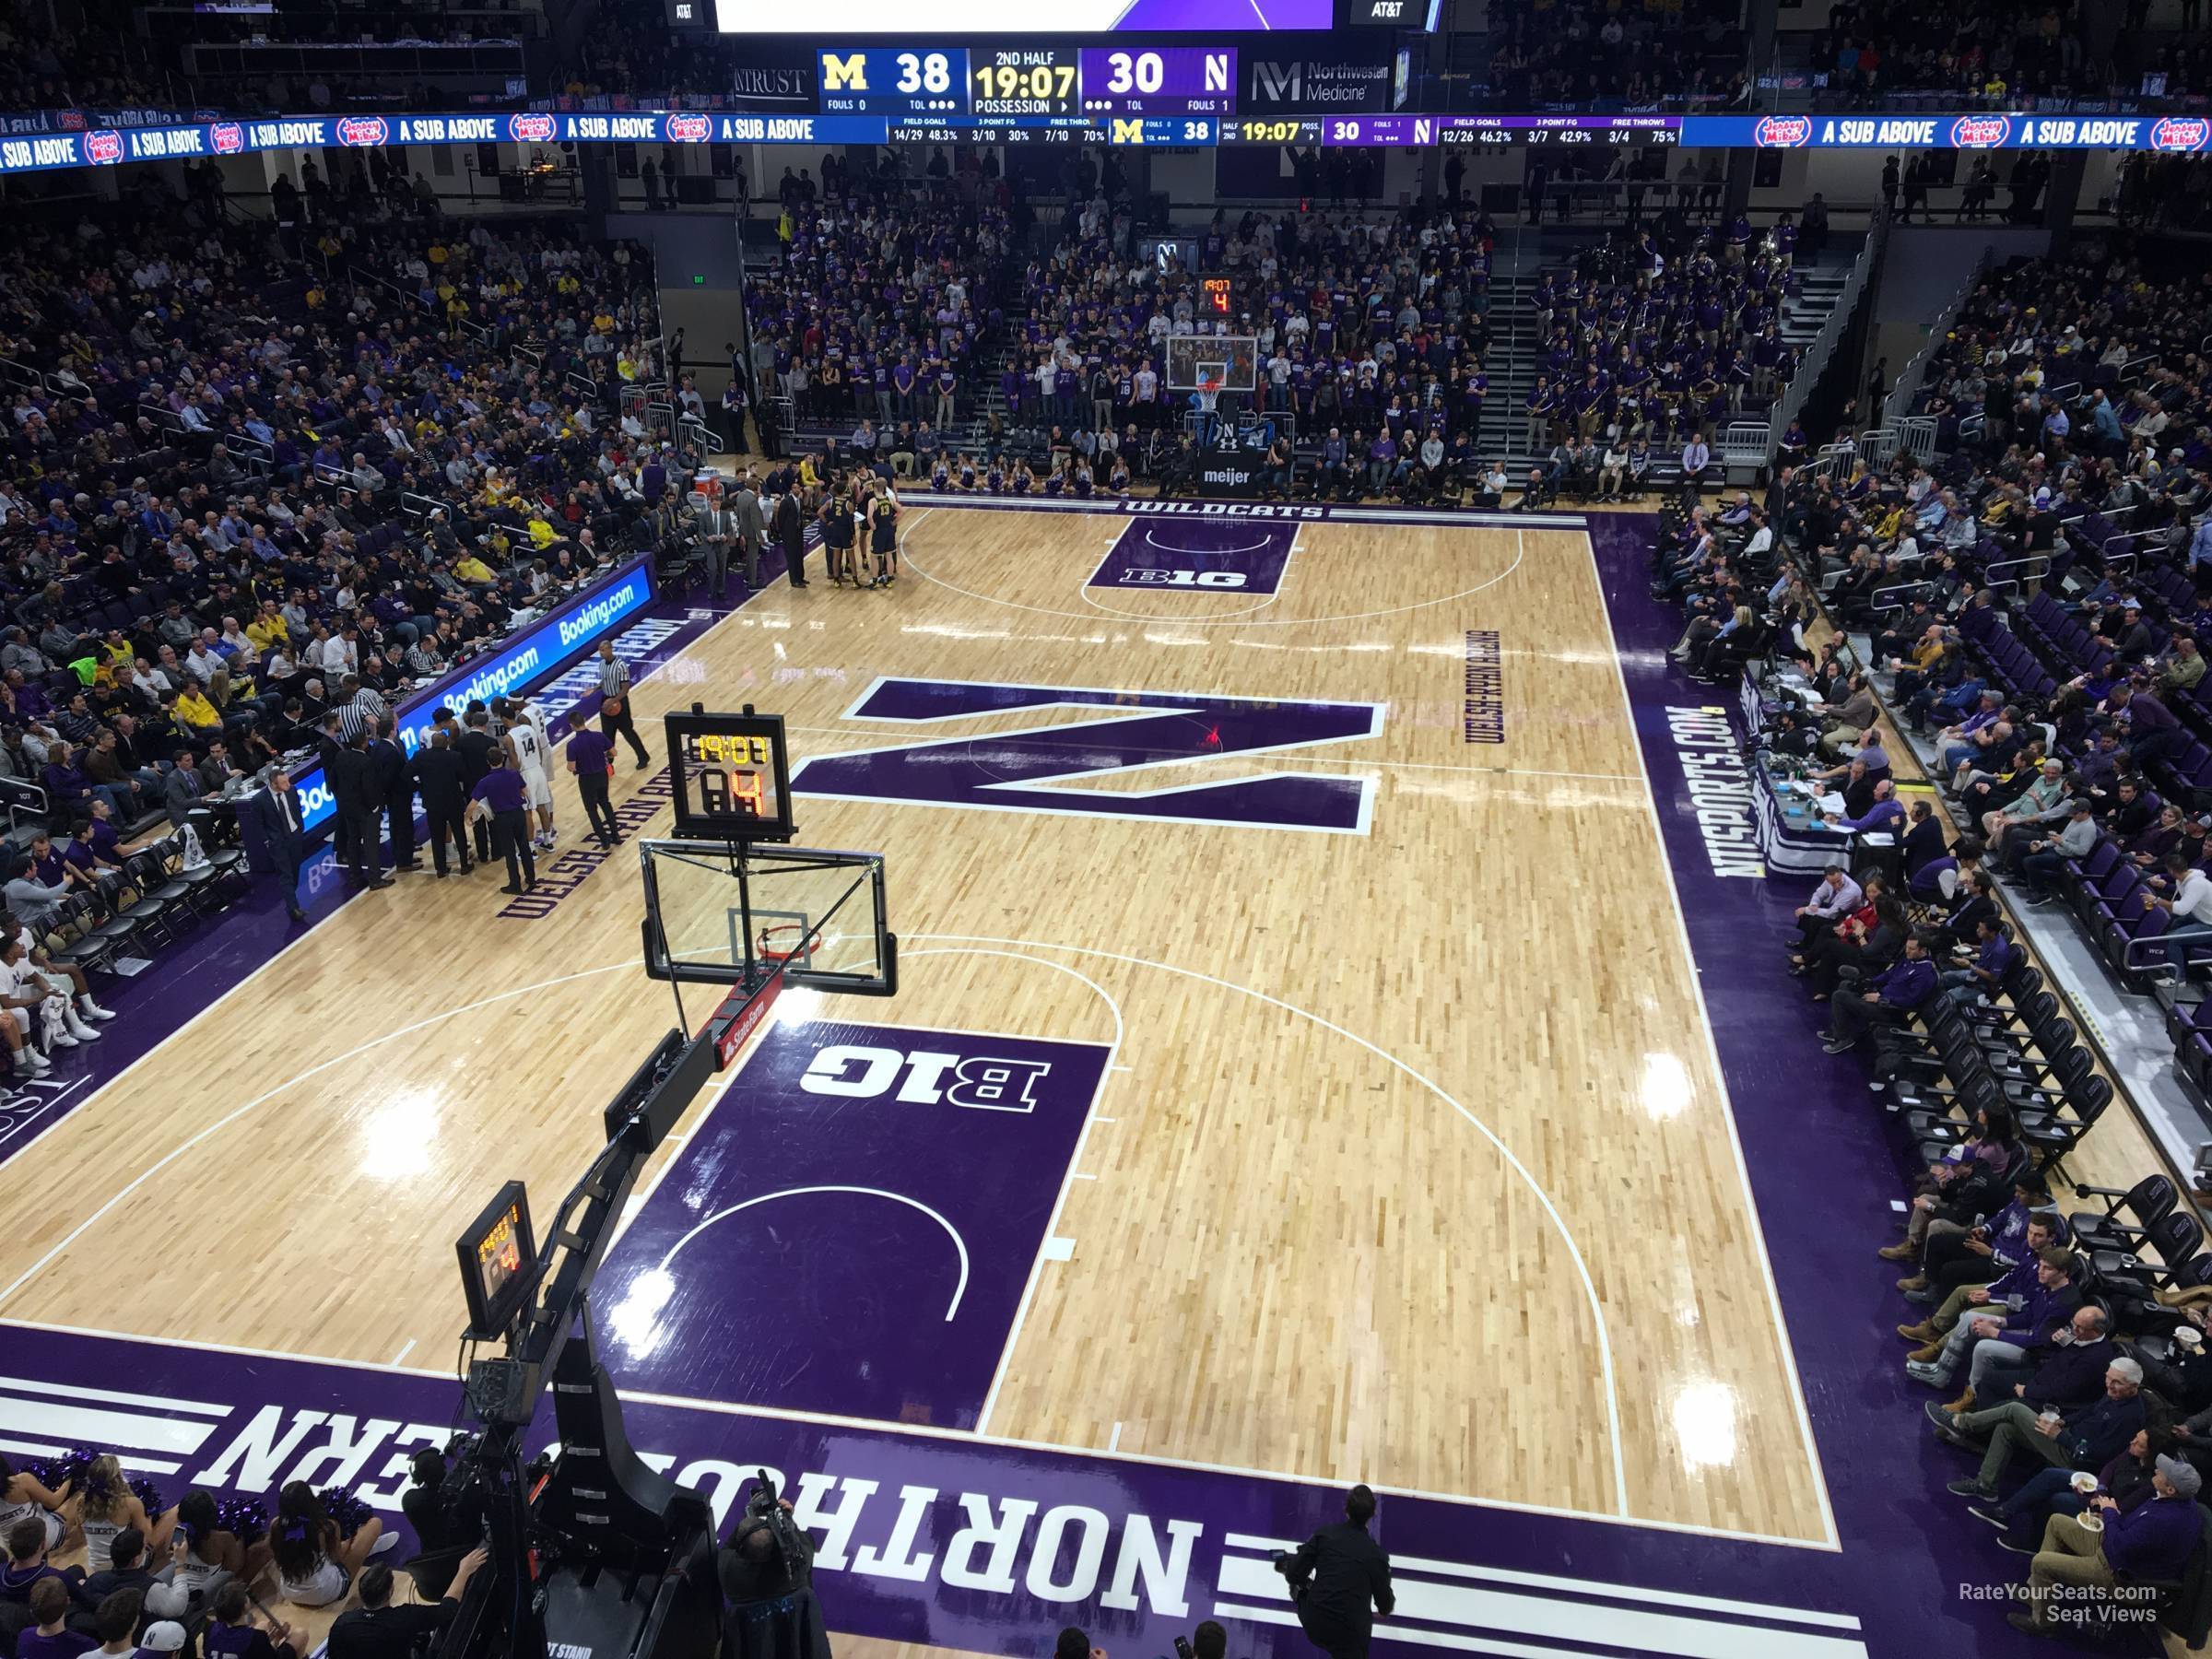 section 203, row 1 seat view  - welsh-ryan arena